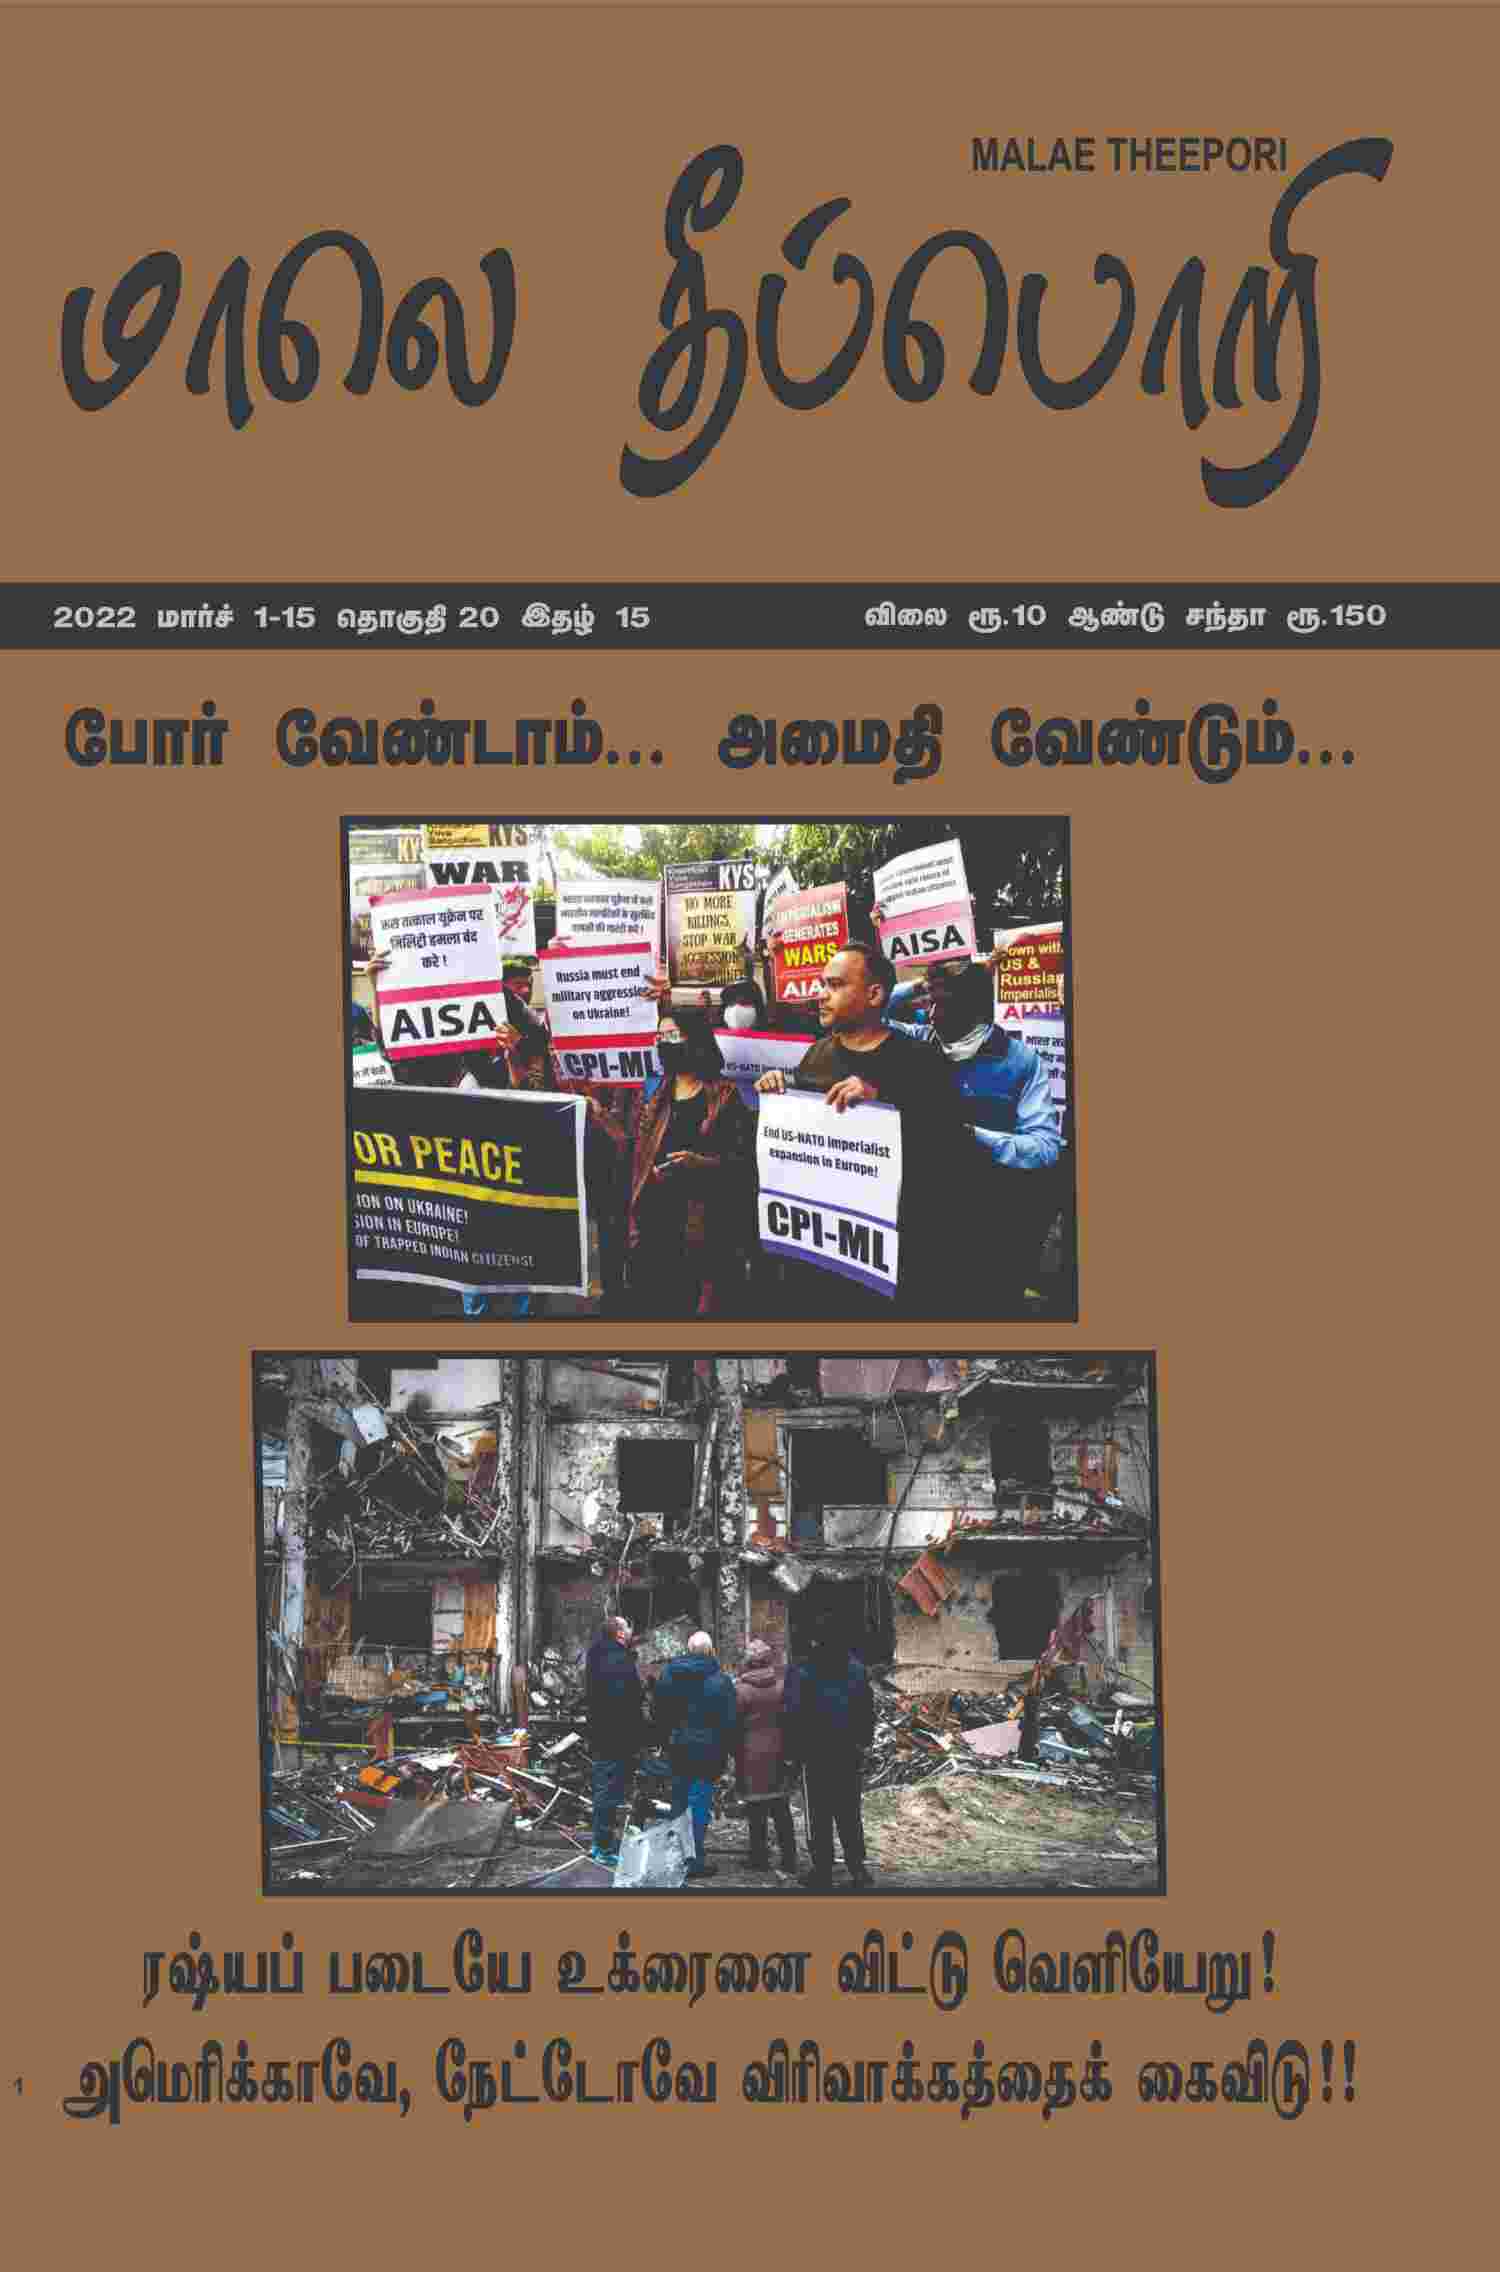 Theepori Cover page 2022  Mar 1-15